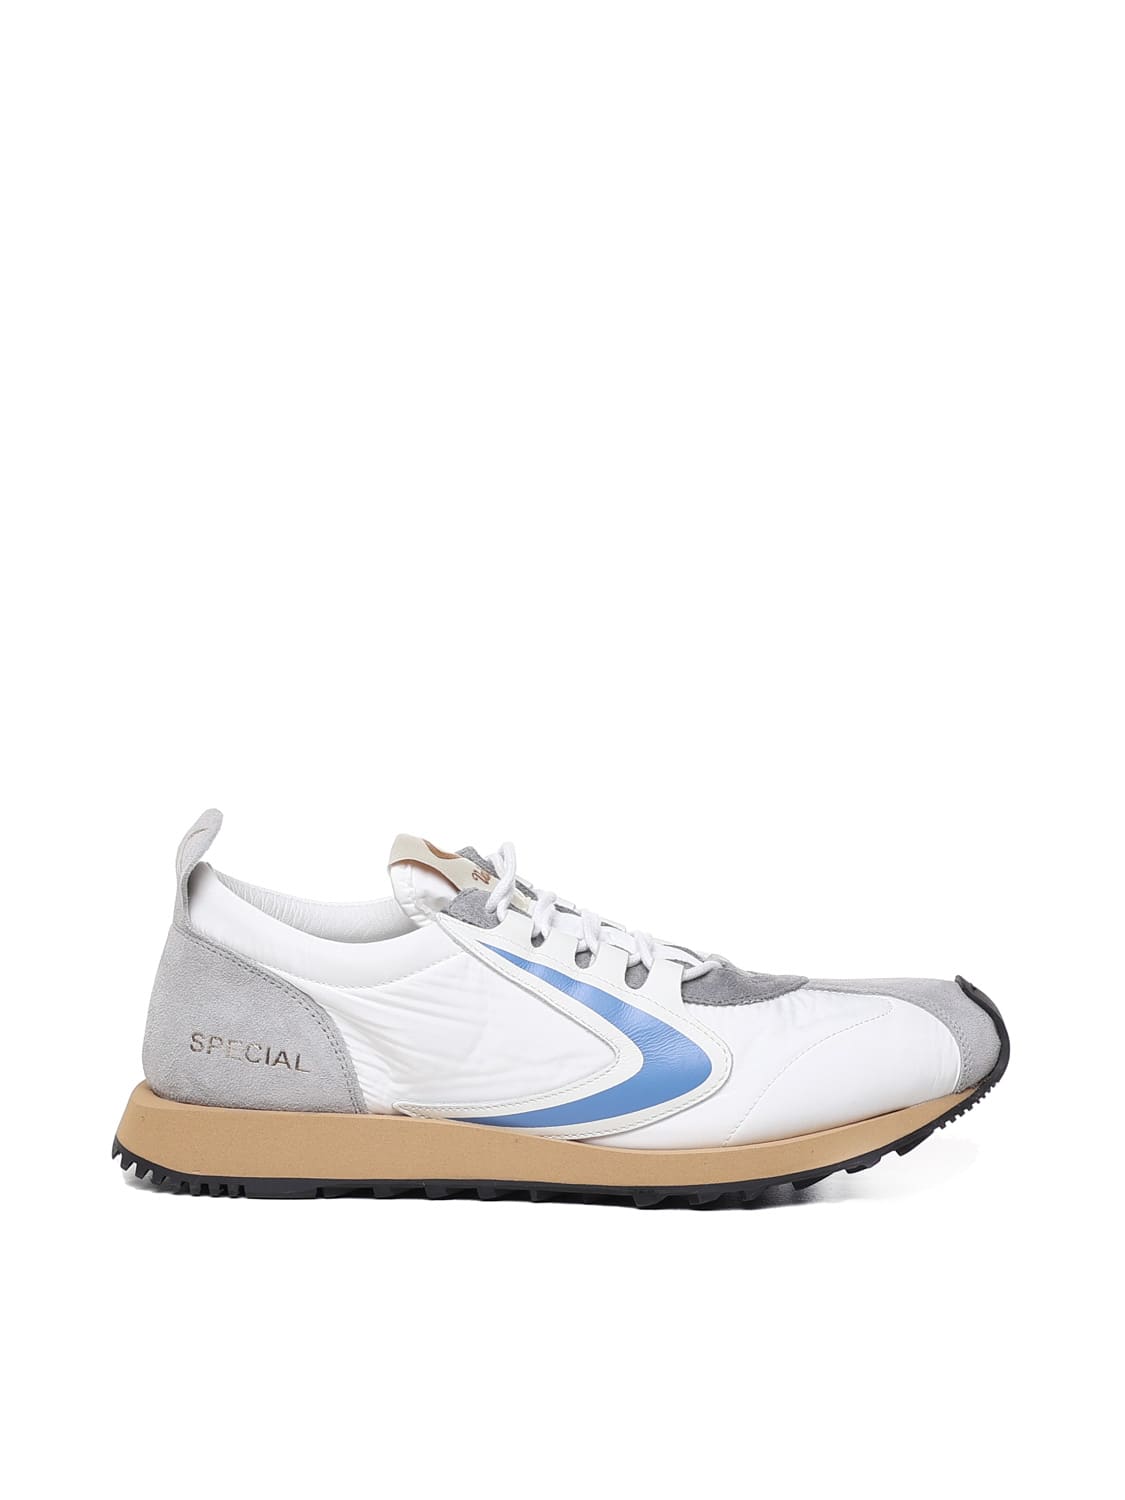 Valsport Special 16 Trainers In White, Grey, Light Blue